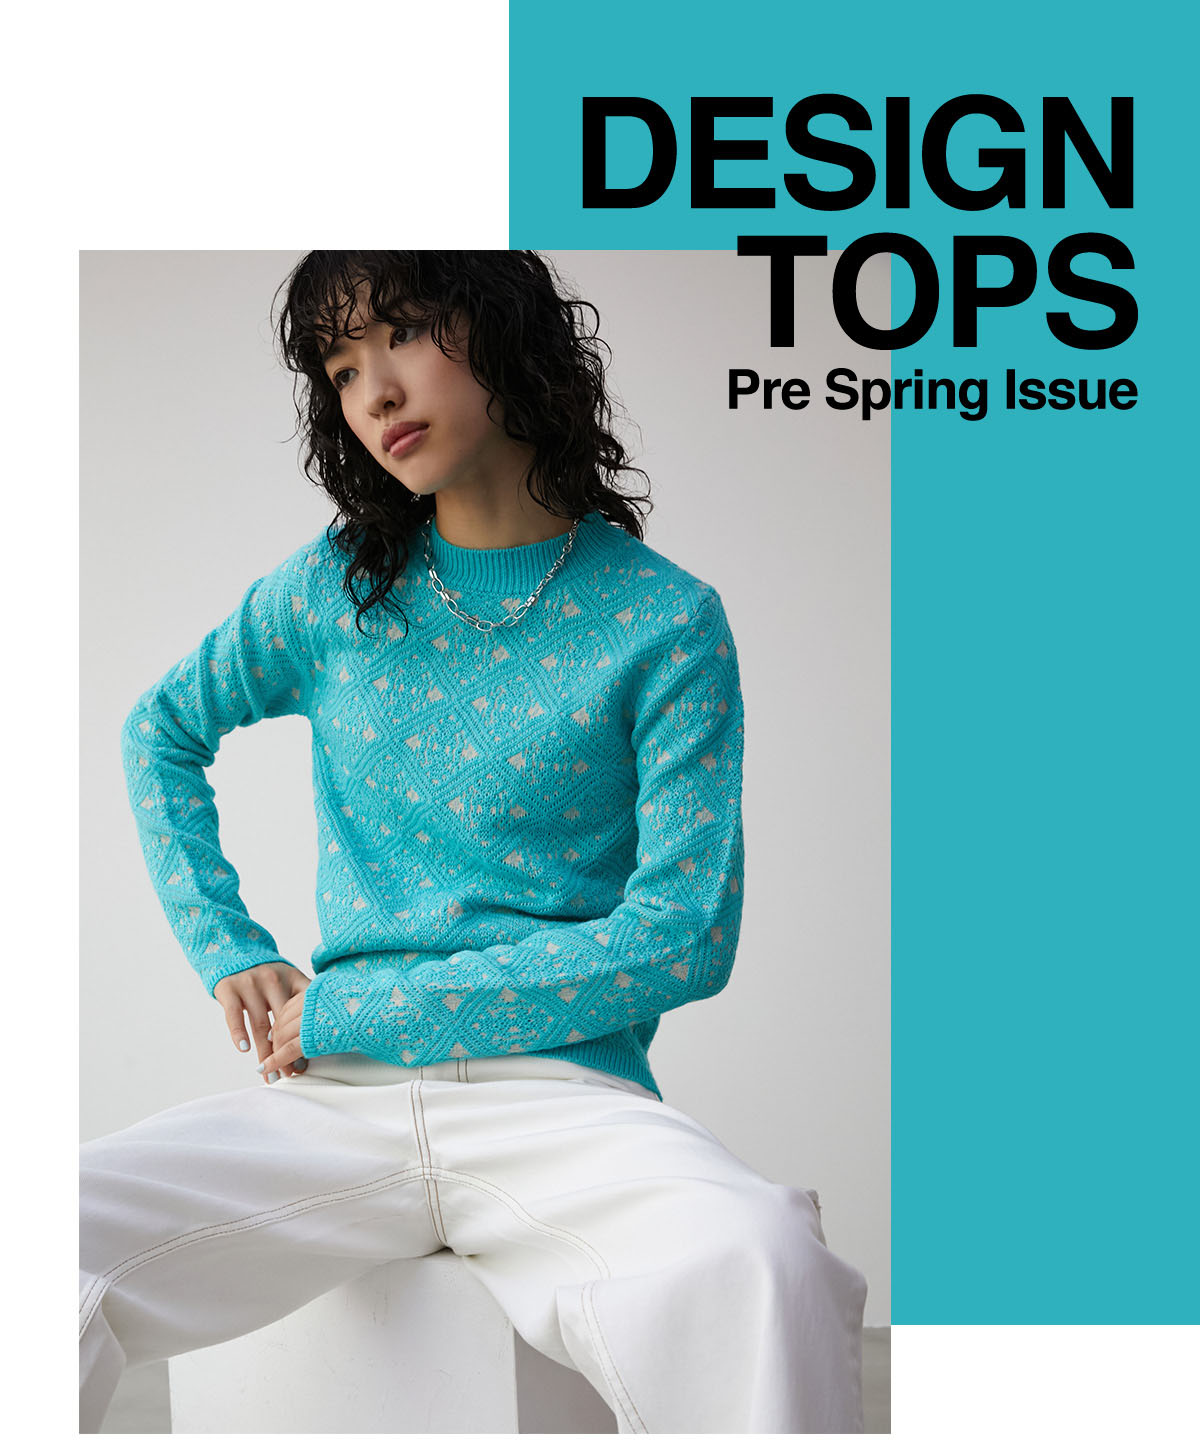 DESIGN TOPS Pre Spring Issue